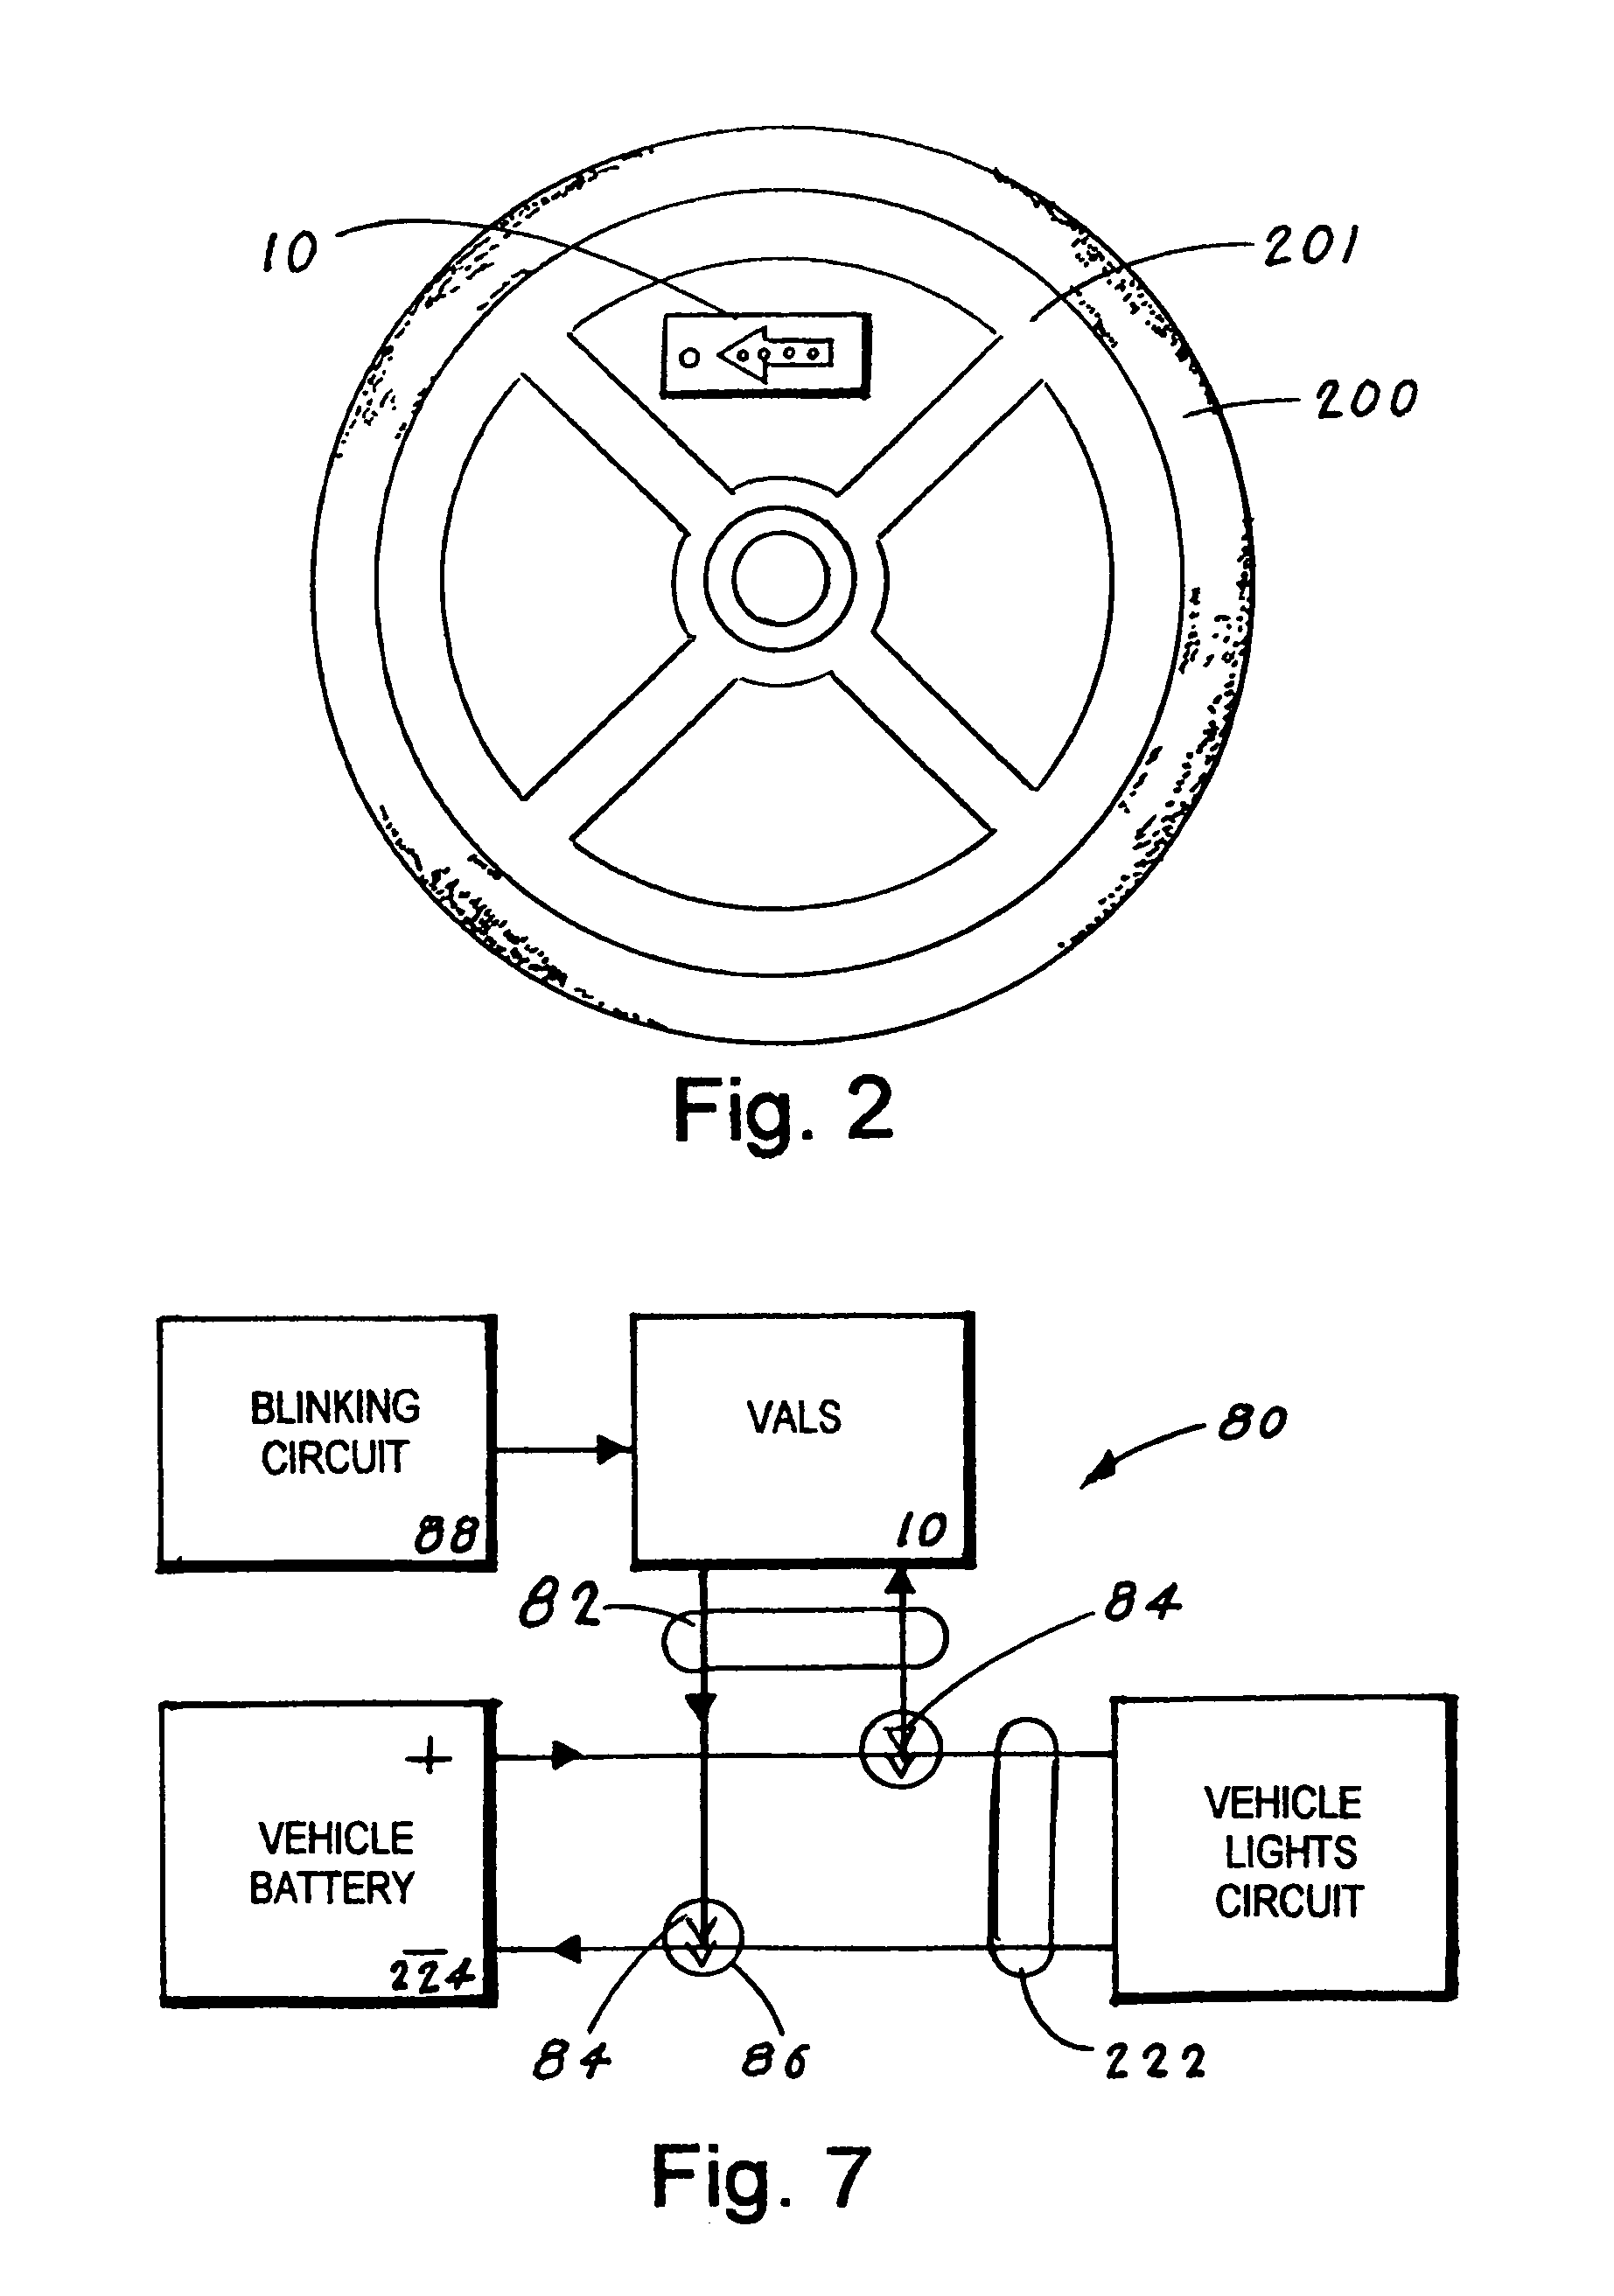 Vehicle auxiliary lighting system